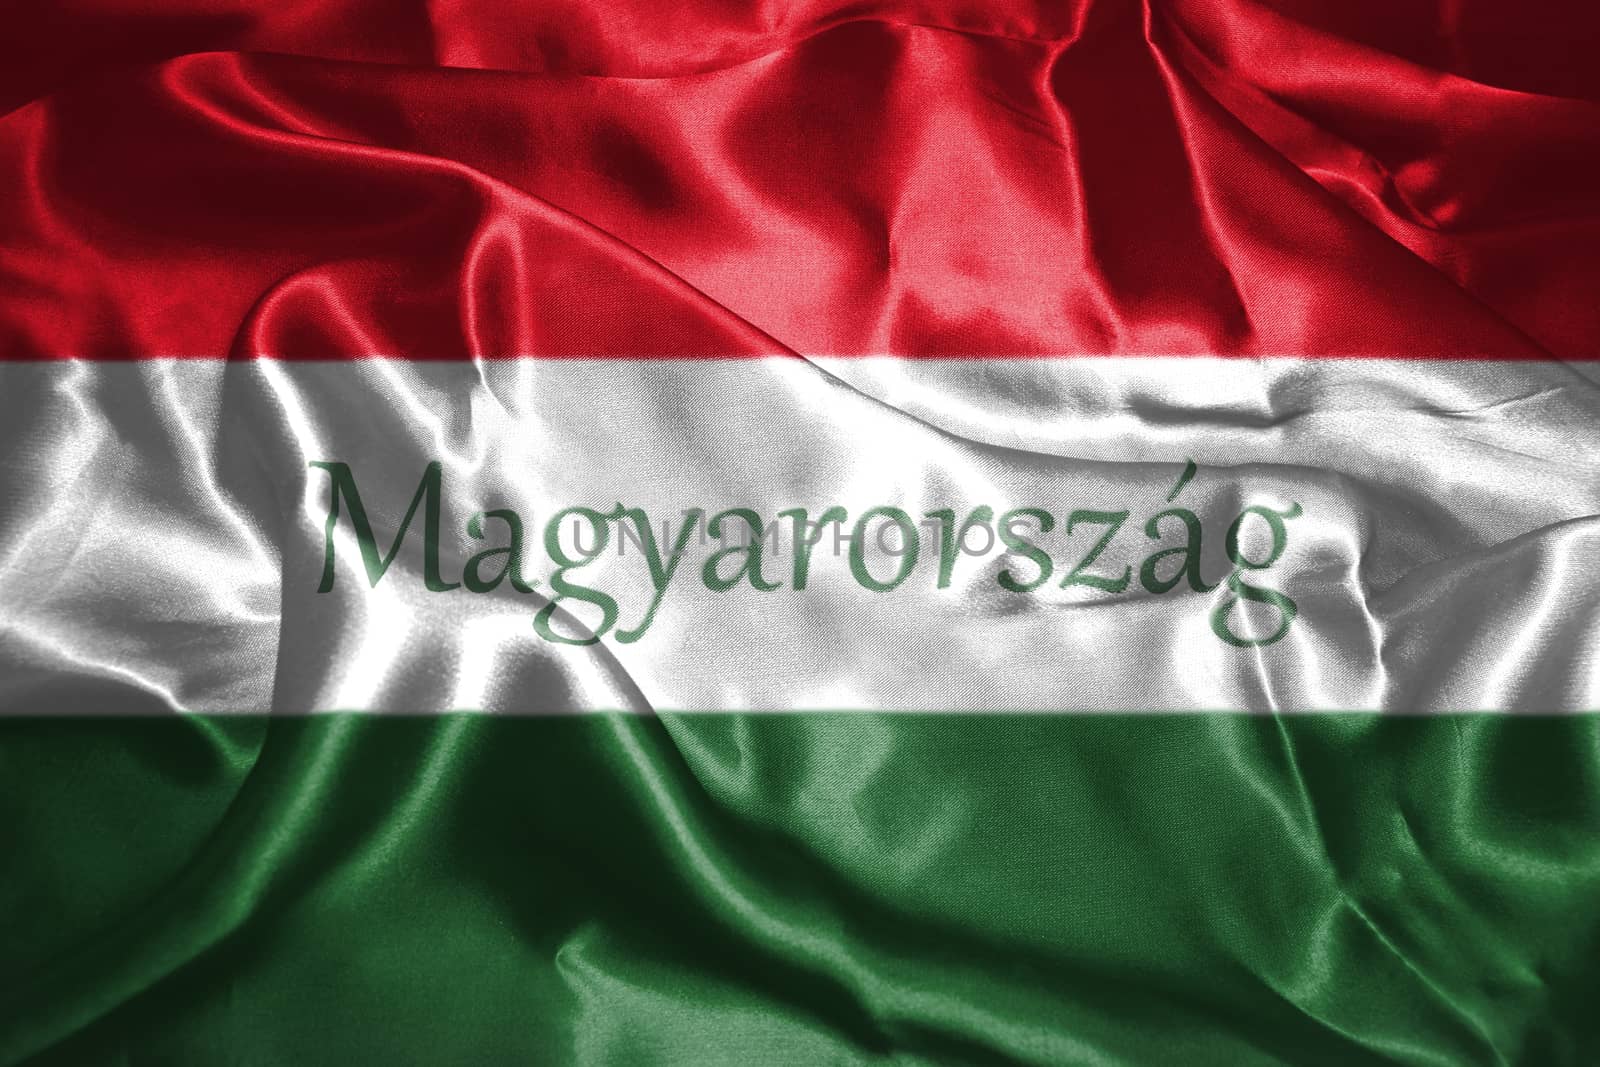 Hungarian National Flag With Hungary Written On It 3D illustration